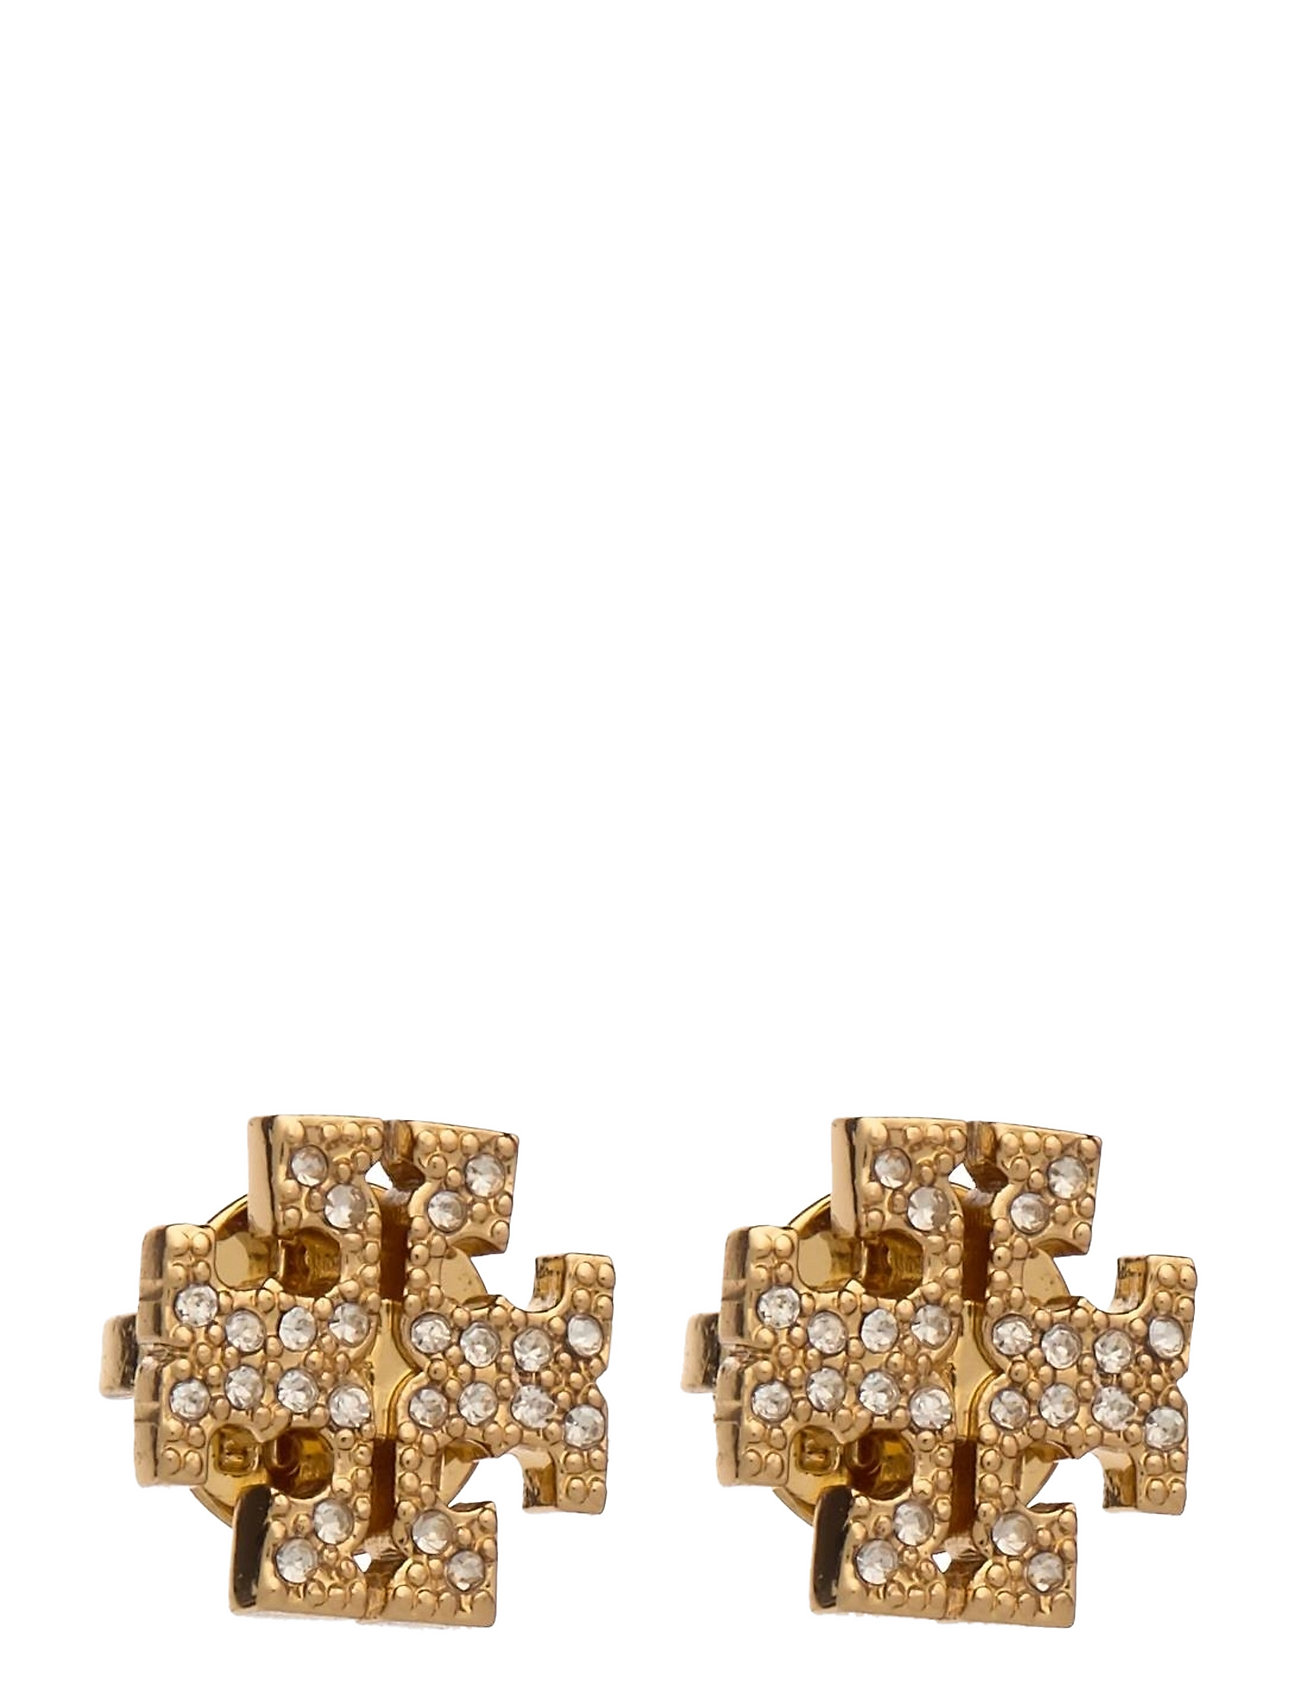 Tory Burch Kira Pave Stud Earring Accessories Jewellery Earrings Studs Guld [Color: TORY GOLD / CRYSTAL ][Sex: Women ][Sizes: ONE SIZE ]